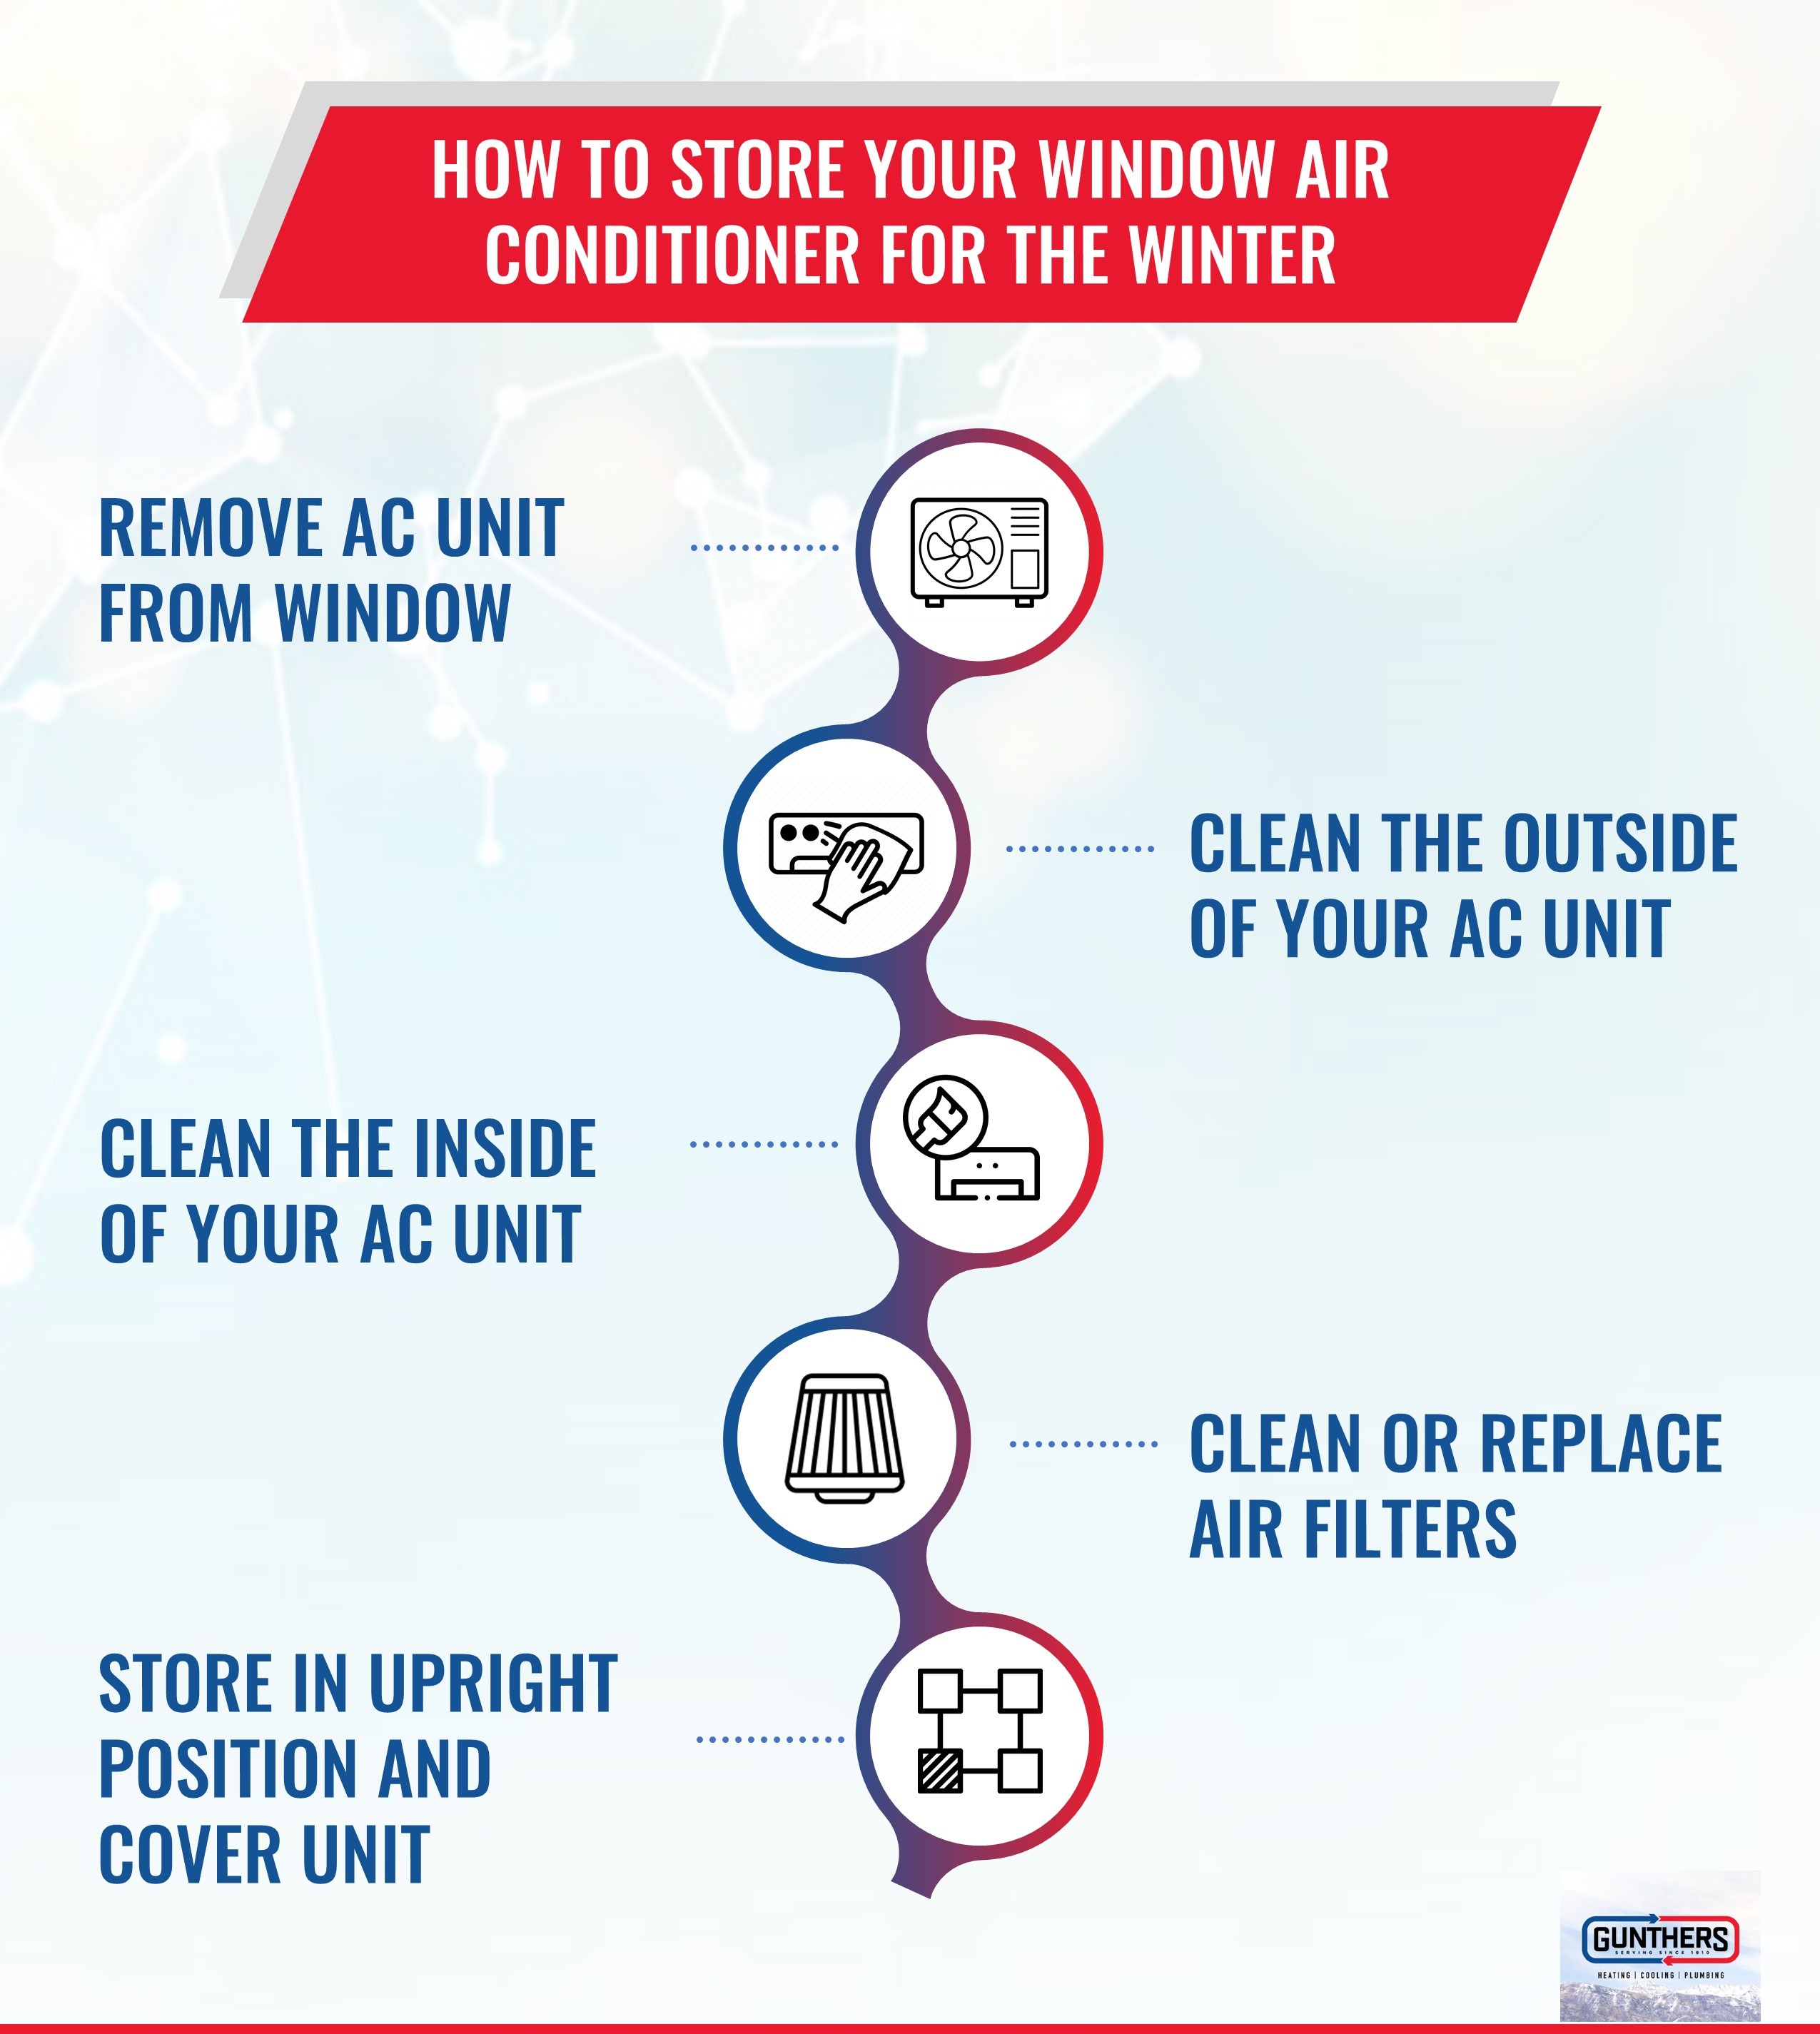 How to Store Your Window Air Conditioner for the Winter